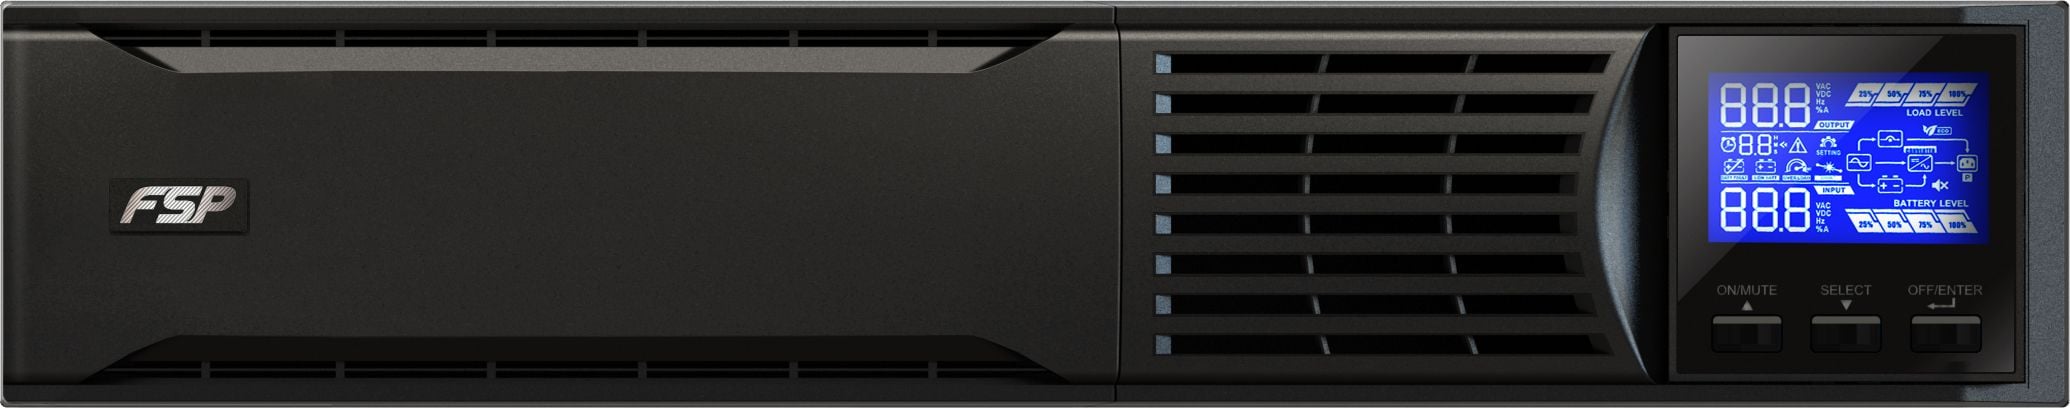 UPS FSP/Fortron Champ 3K (PPF27A1102)